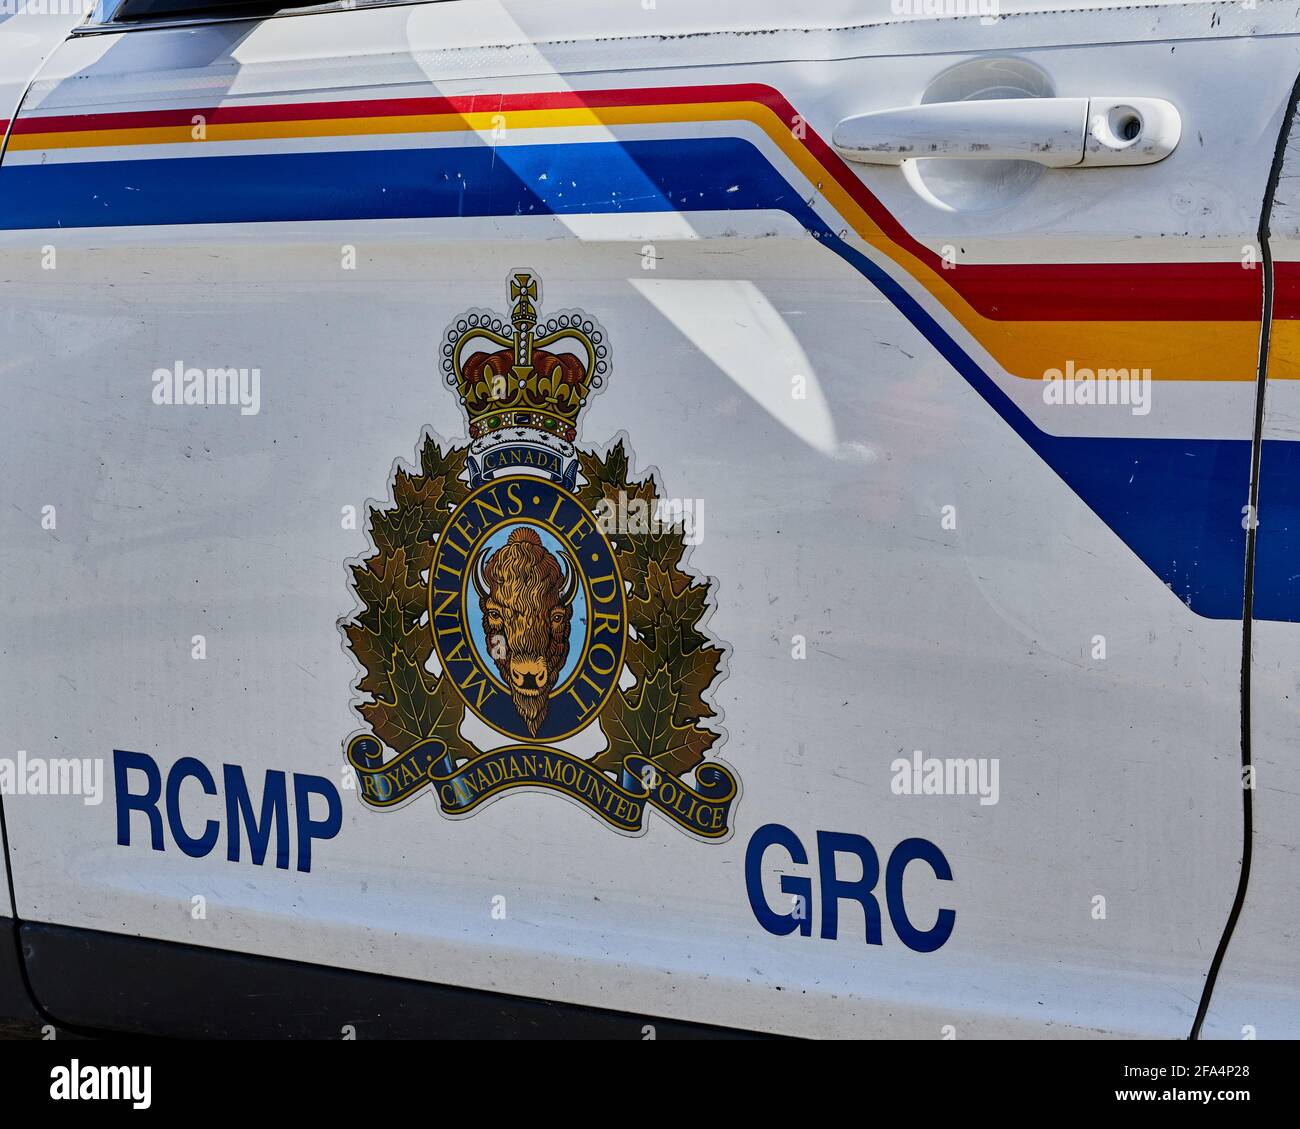 RCMP Royal Canadian Mounted Police Stock Photo